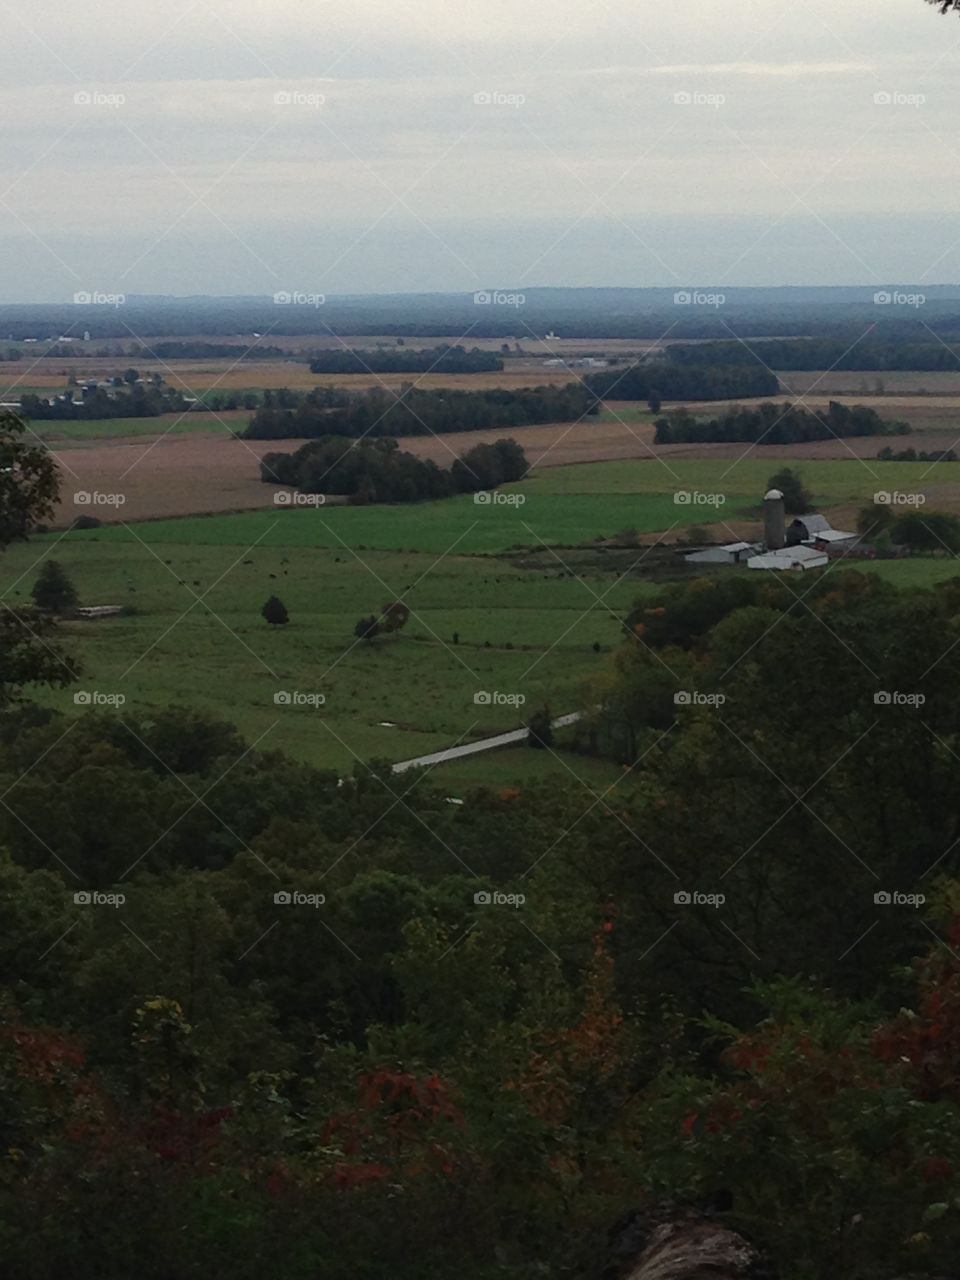 Southern Indiana overlook